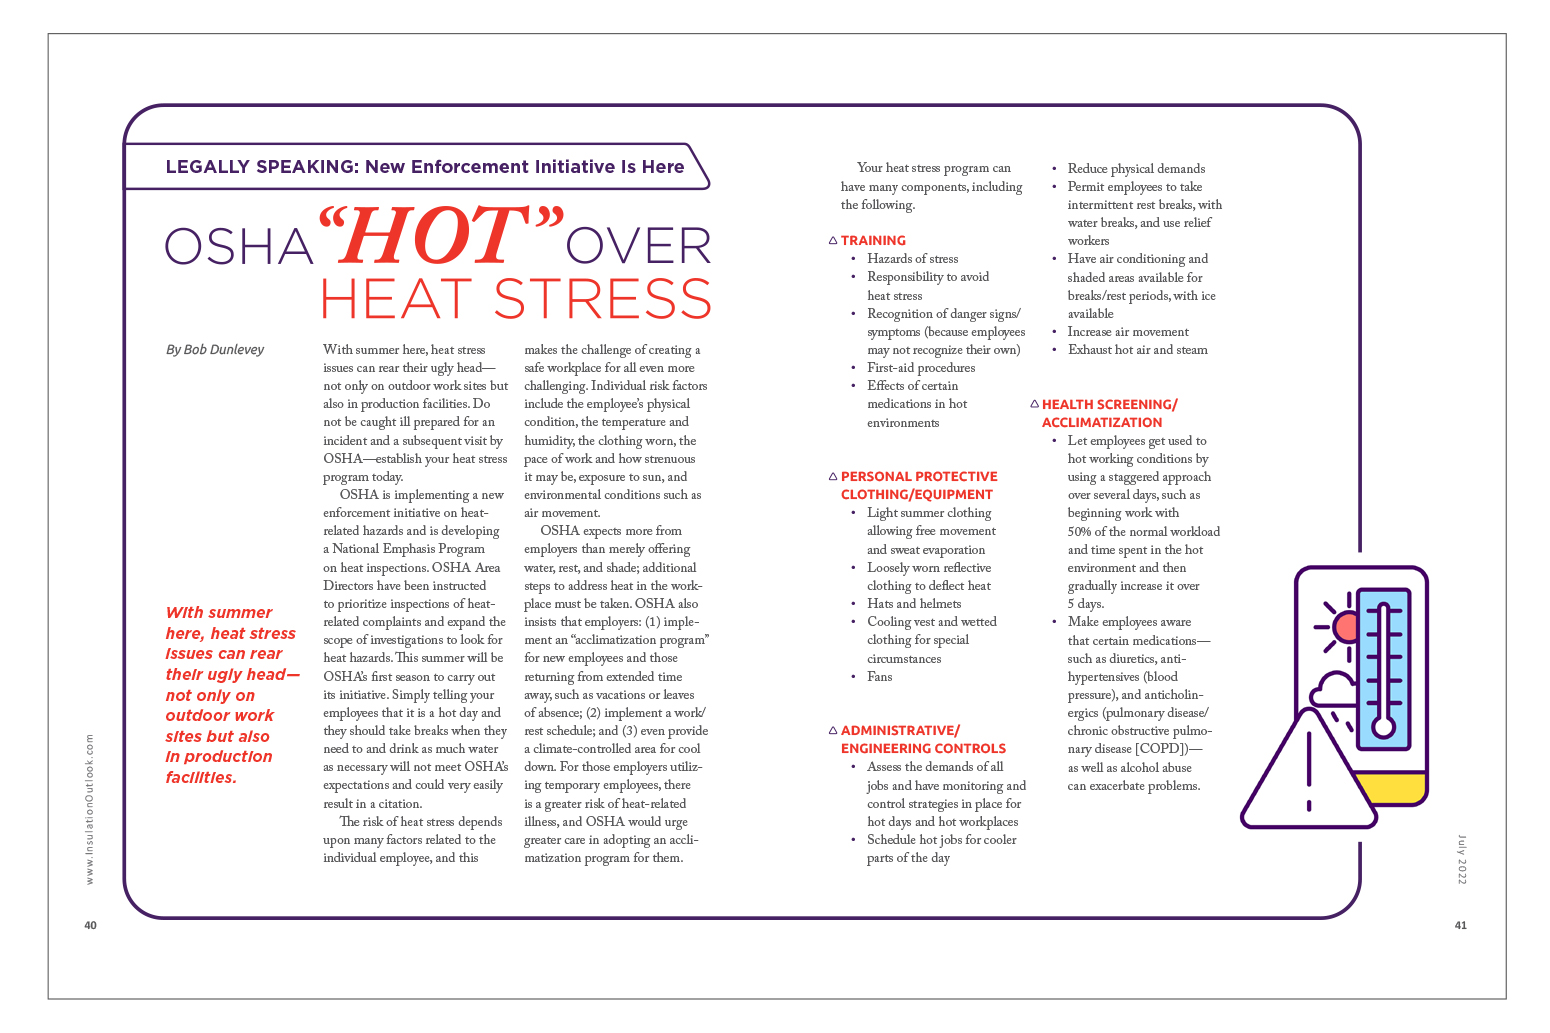 LEGALLY SPEAKING: New Enforcement Initiative Is Here—OSHA Hot Over Heat  Stress - Insulation Outlook Magazine